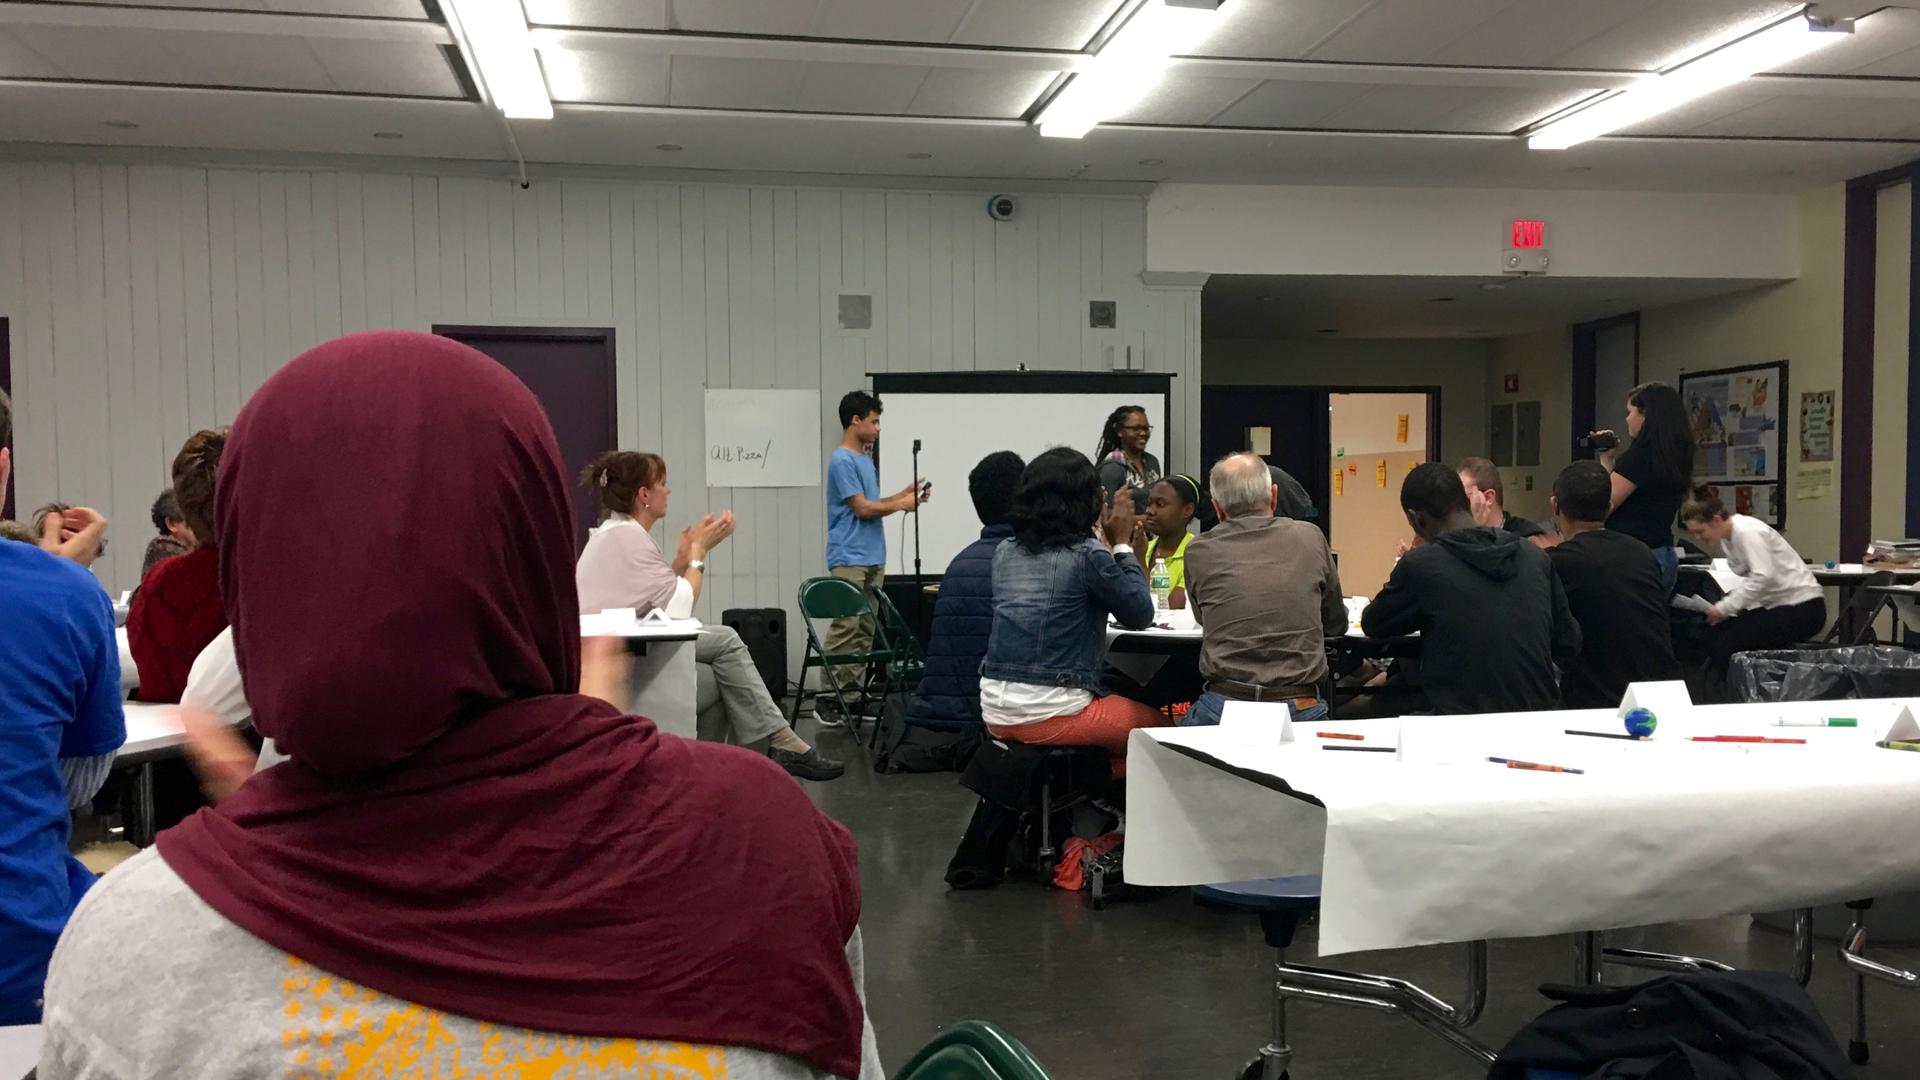 Medford students have been taking part in a series of public meetings with city officials, community members and local clergy about religious diversity.